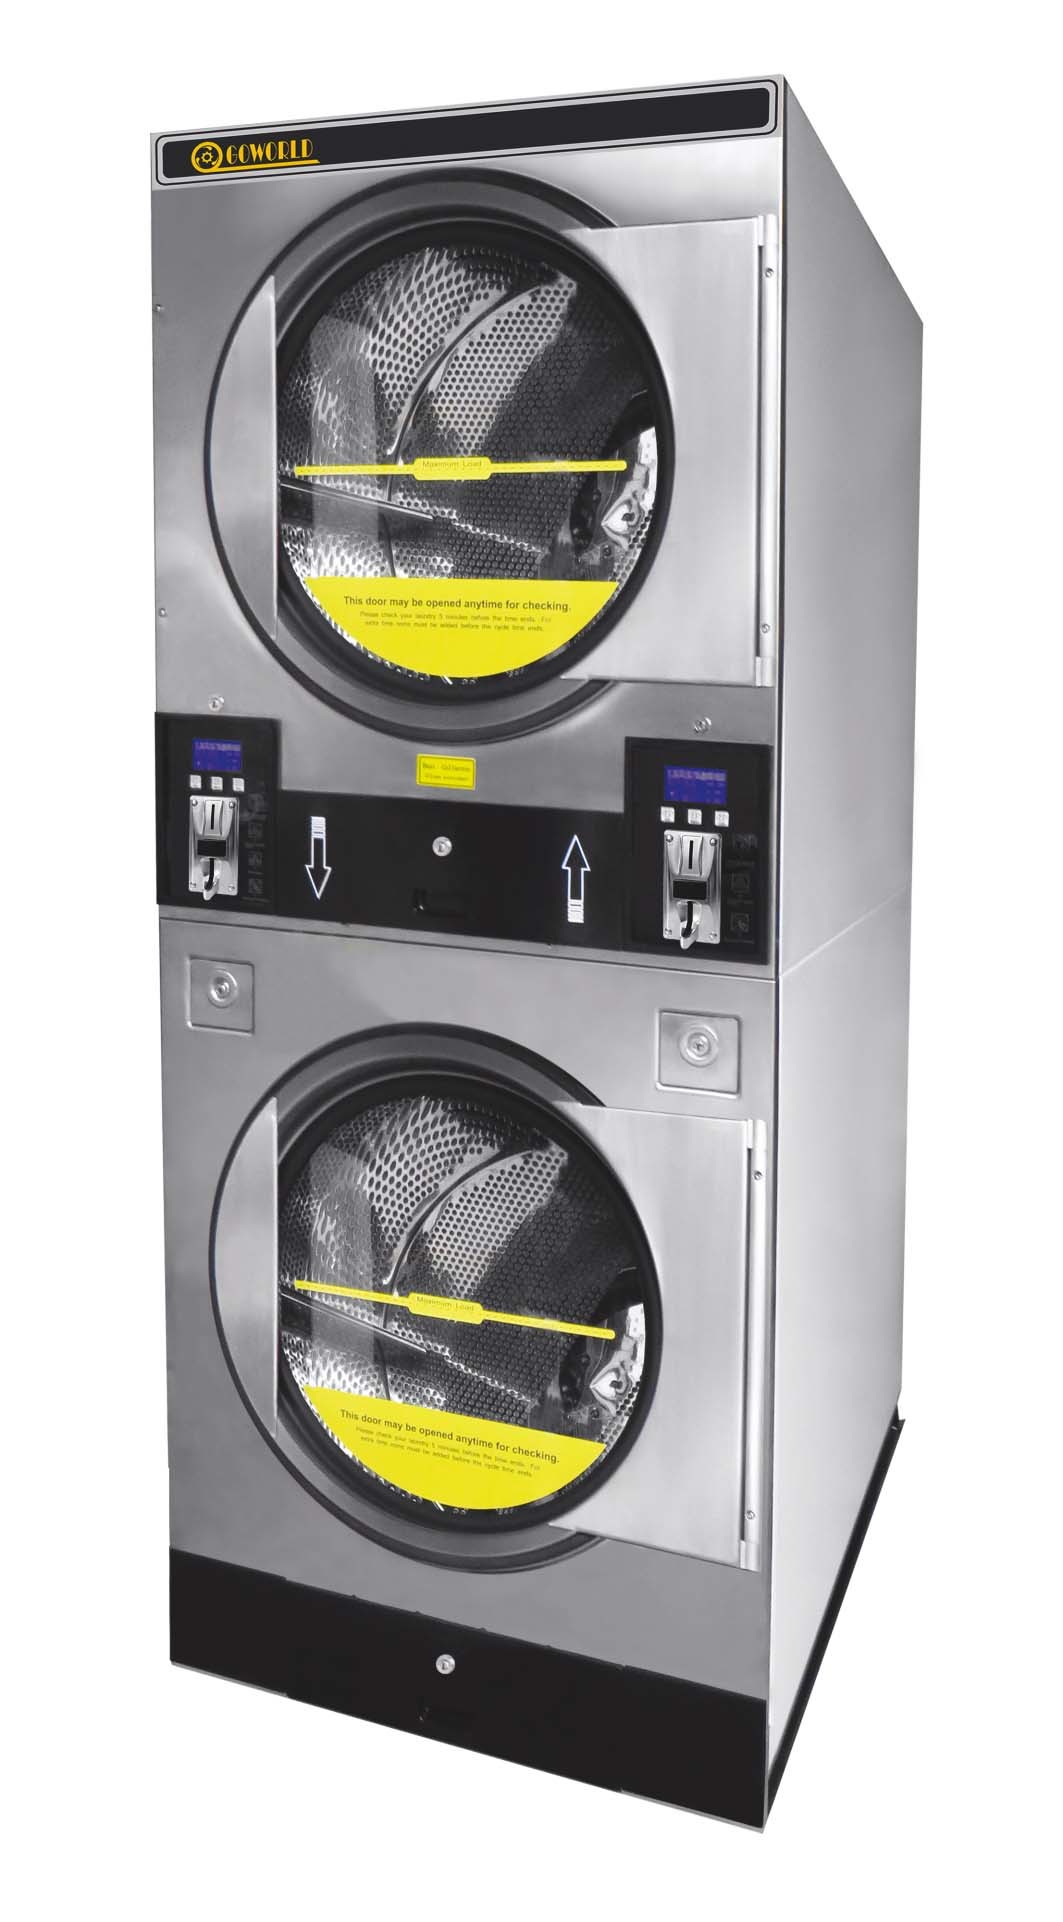 8kg-12kg stack dryers(industrial&commercial laundry washing machine,dryer,ironer)